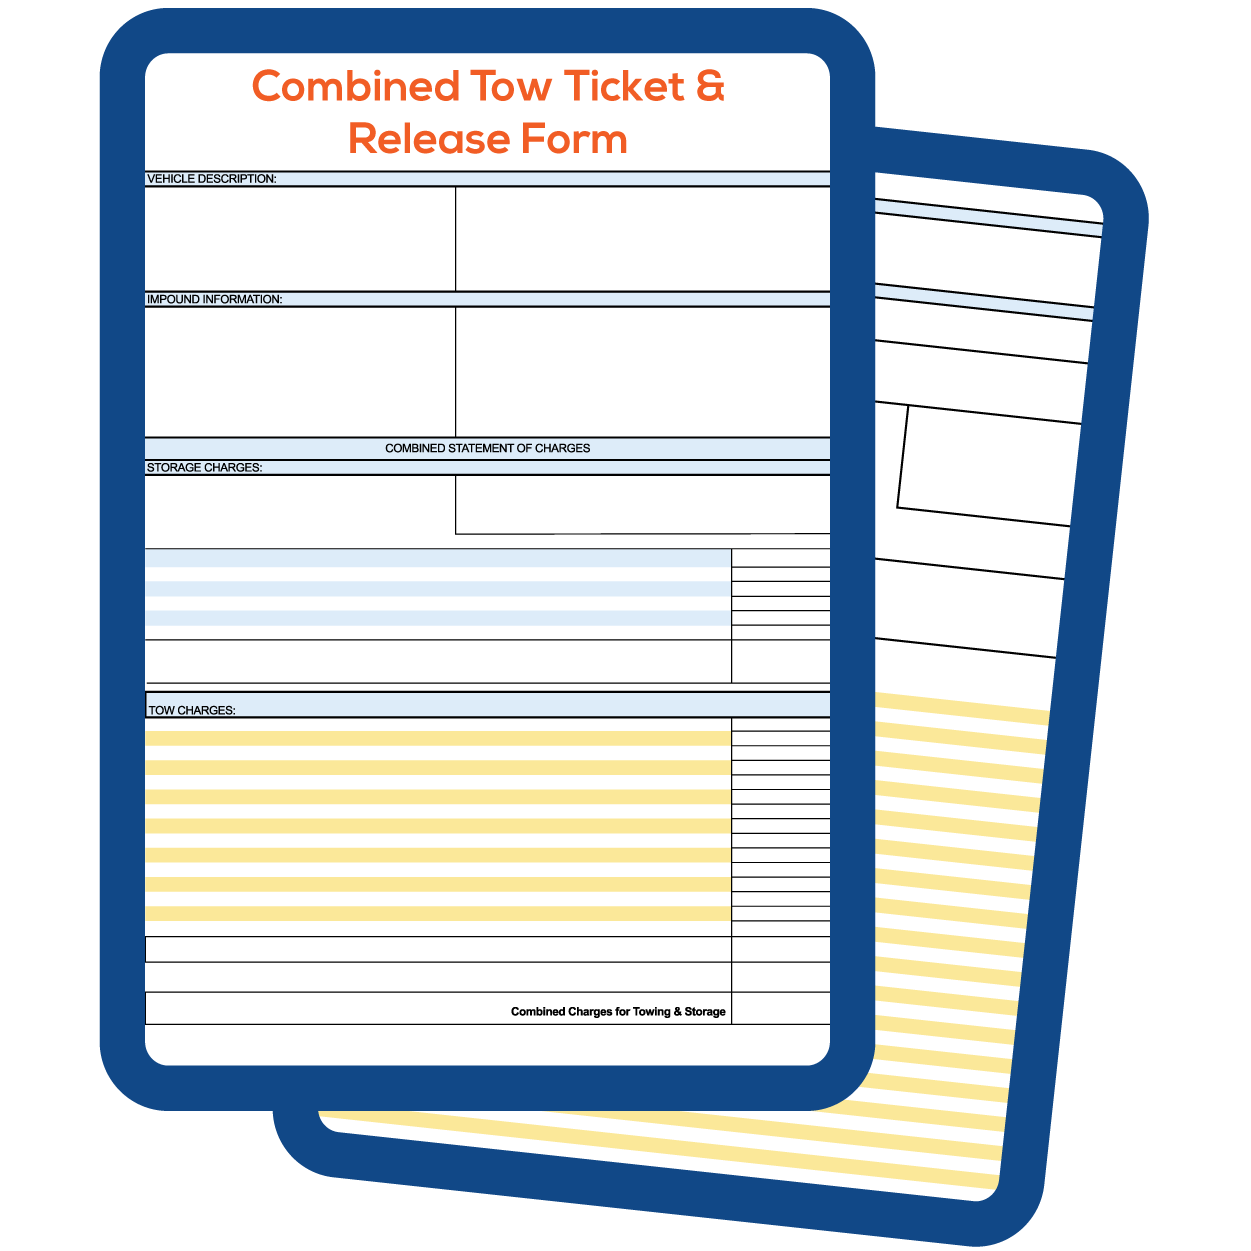 COMBINED TOW TICKET & VEHICLE RELEASE FORM